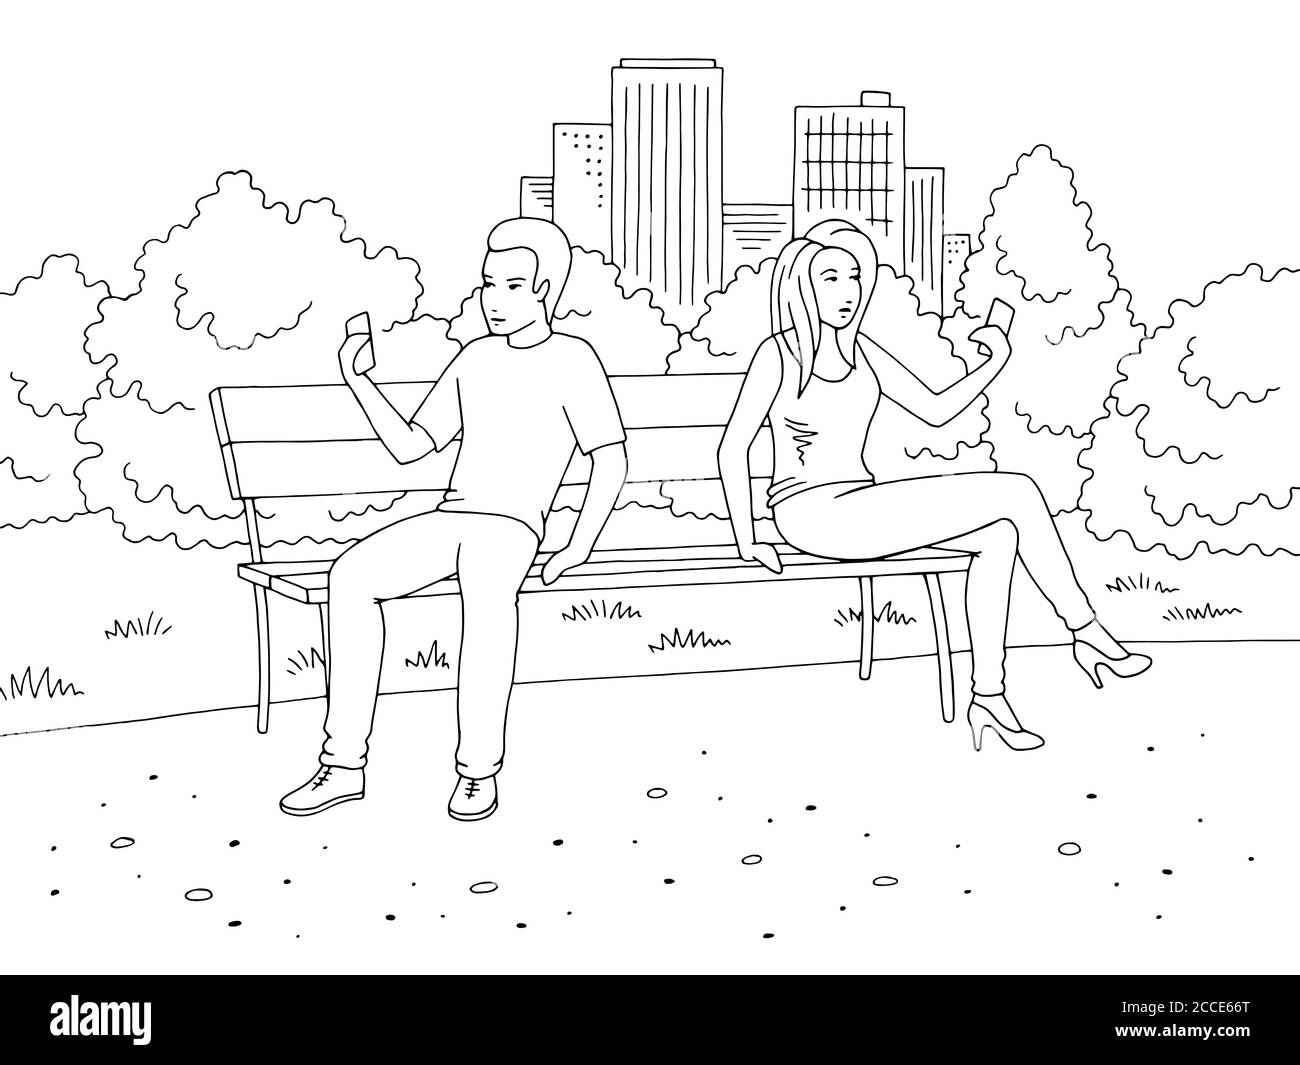 Man and woman sitting on a bench and looking at the phone park graphic black white landscape sketch illustration vector Stock Vector